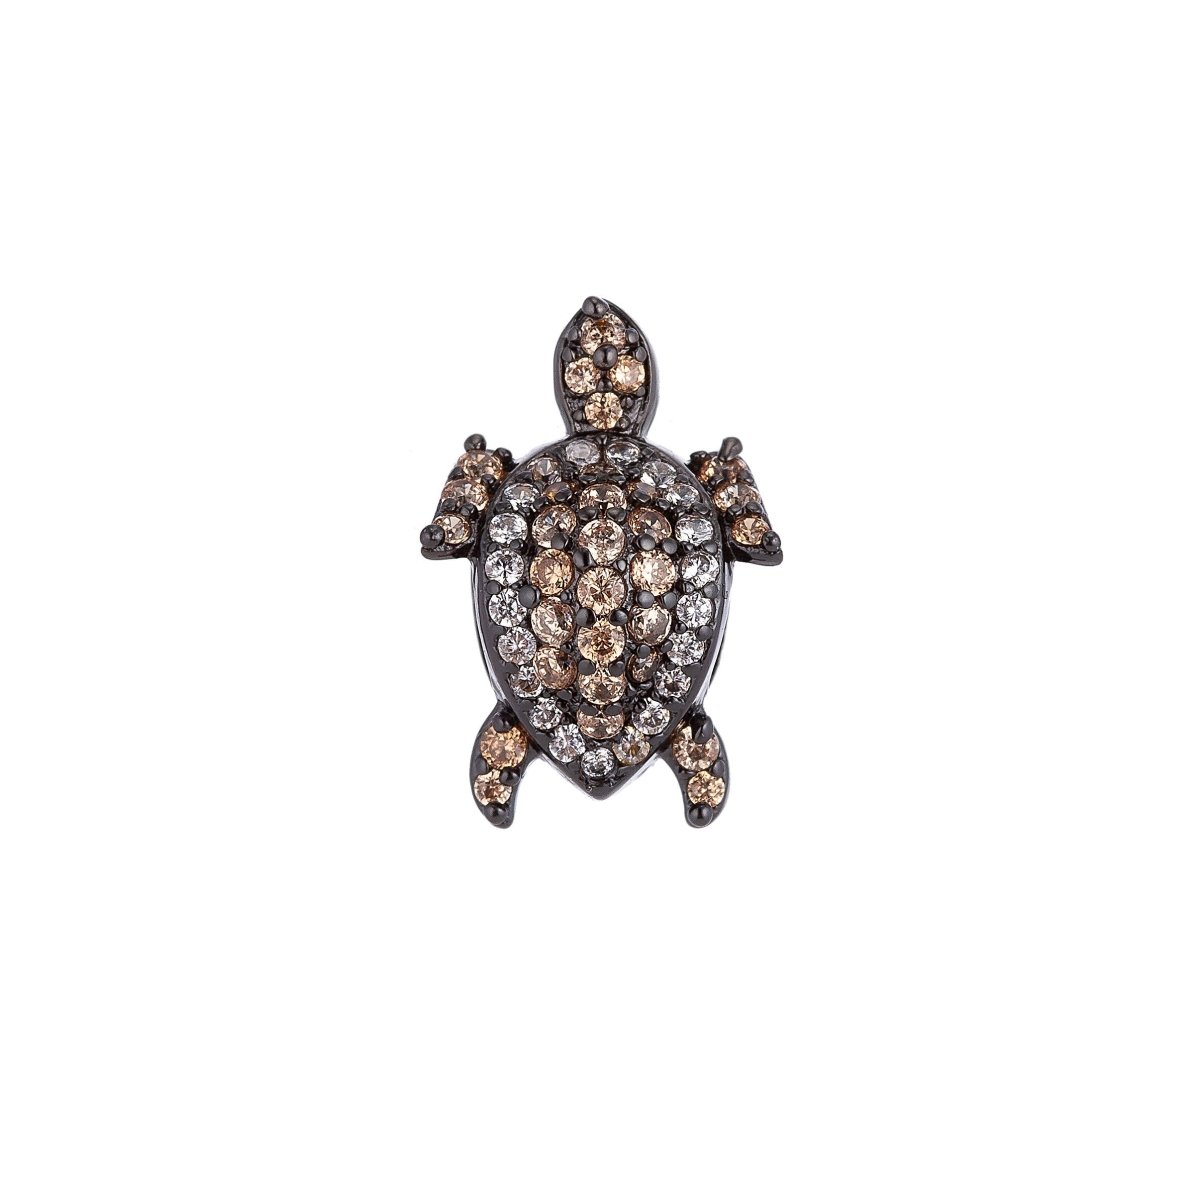 On Sale! CLEARANCE! 10mm Micro Paved Beach Turtle Gold Filled Spacer Bead | B-030 - DLUXCA